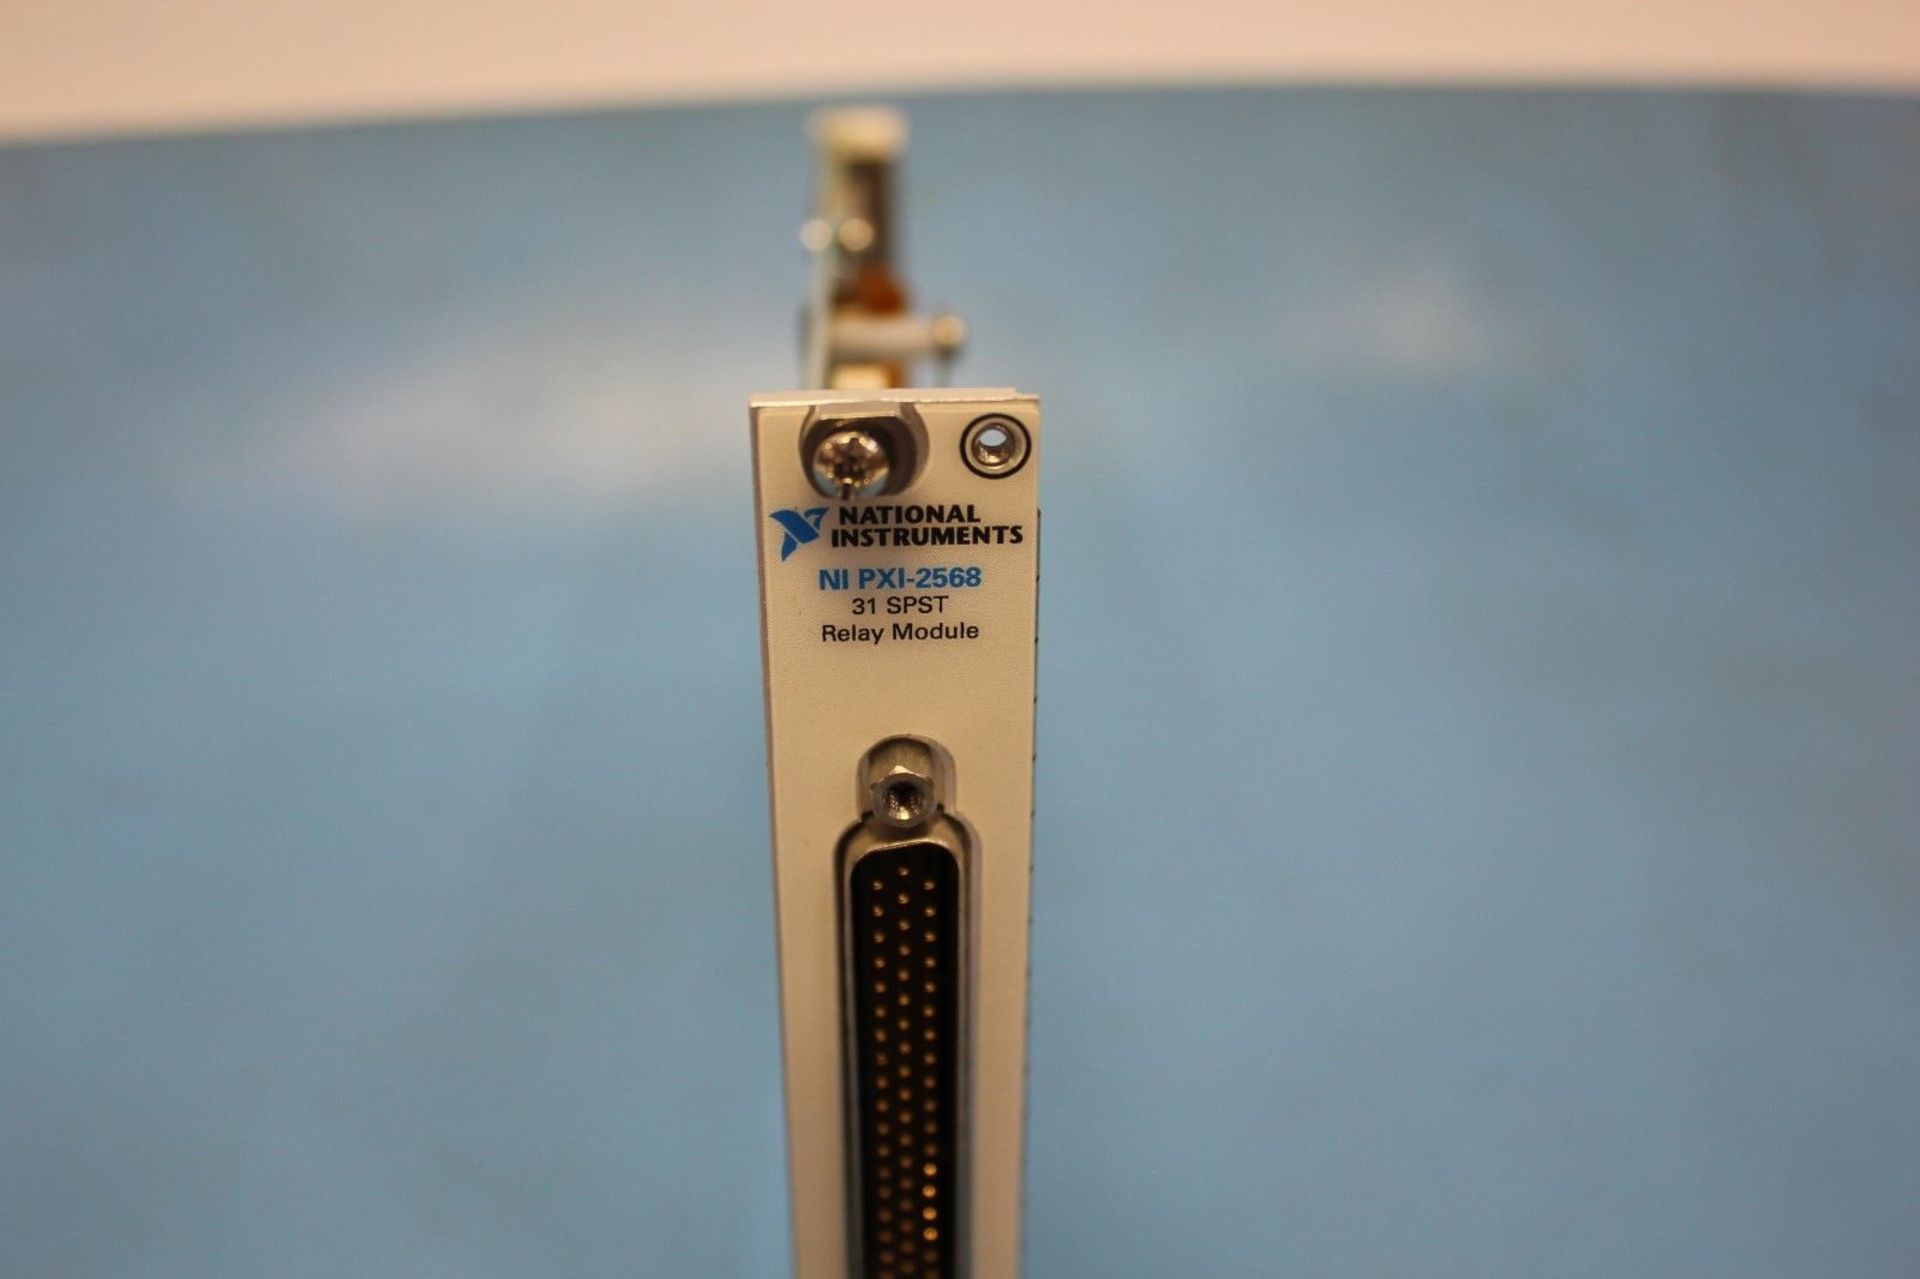 National Instruments NI PXI-2568 relay module - Image 2 of 2